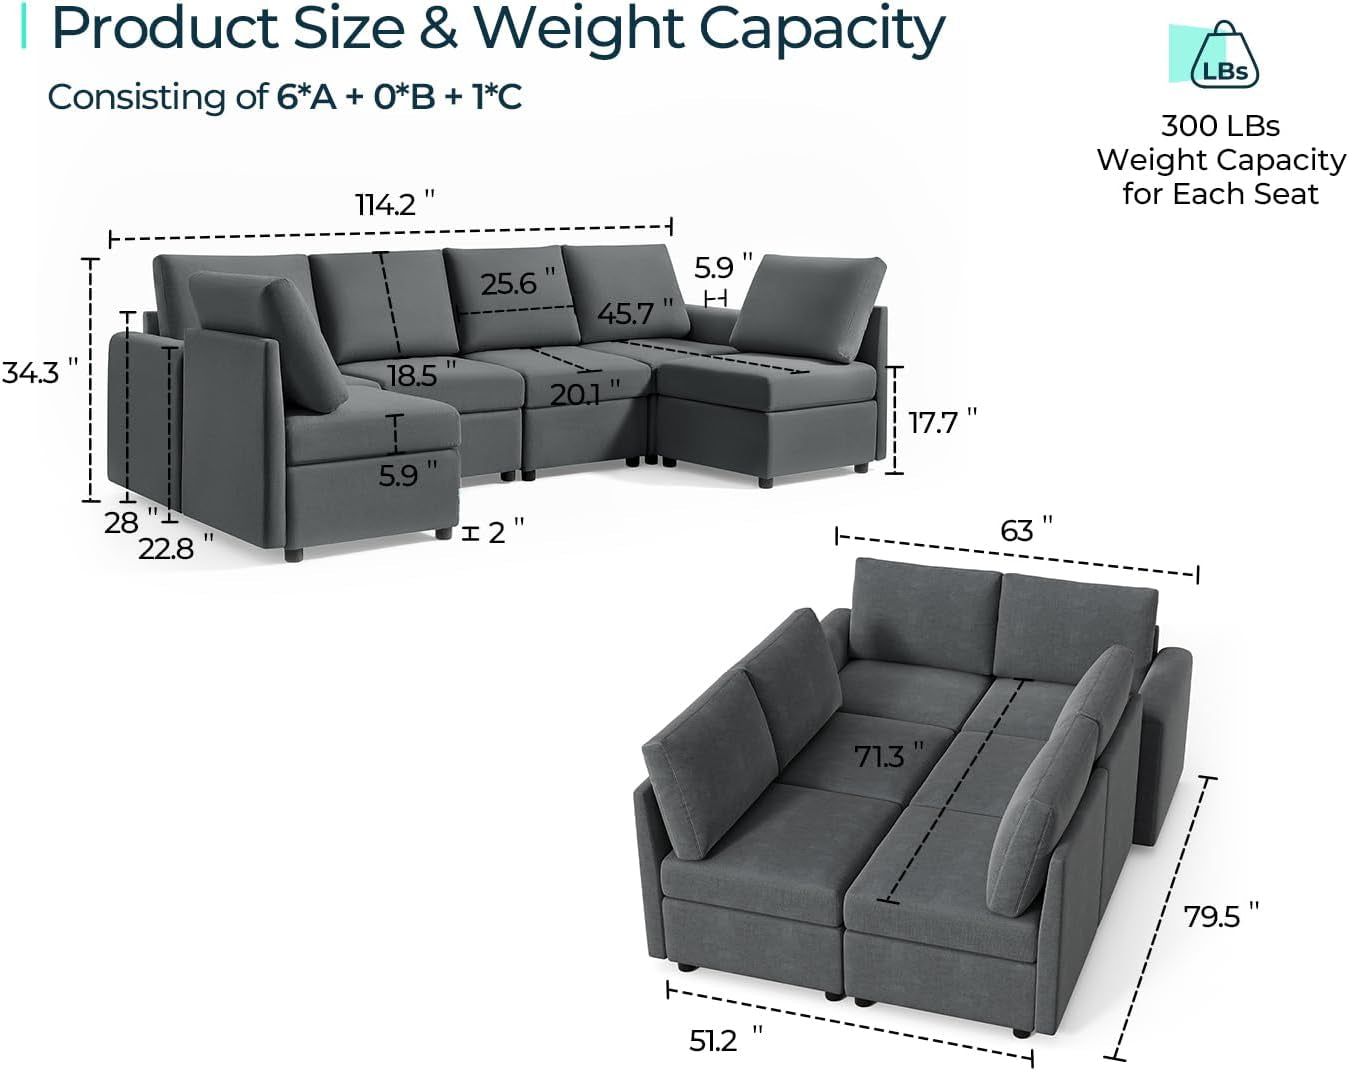 Modular Sofa, Sectional Couch U Shaped Sofa with Storage, Memory Foam, 6 Seat Sectionals Chaise for Living Room, Dark Grey